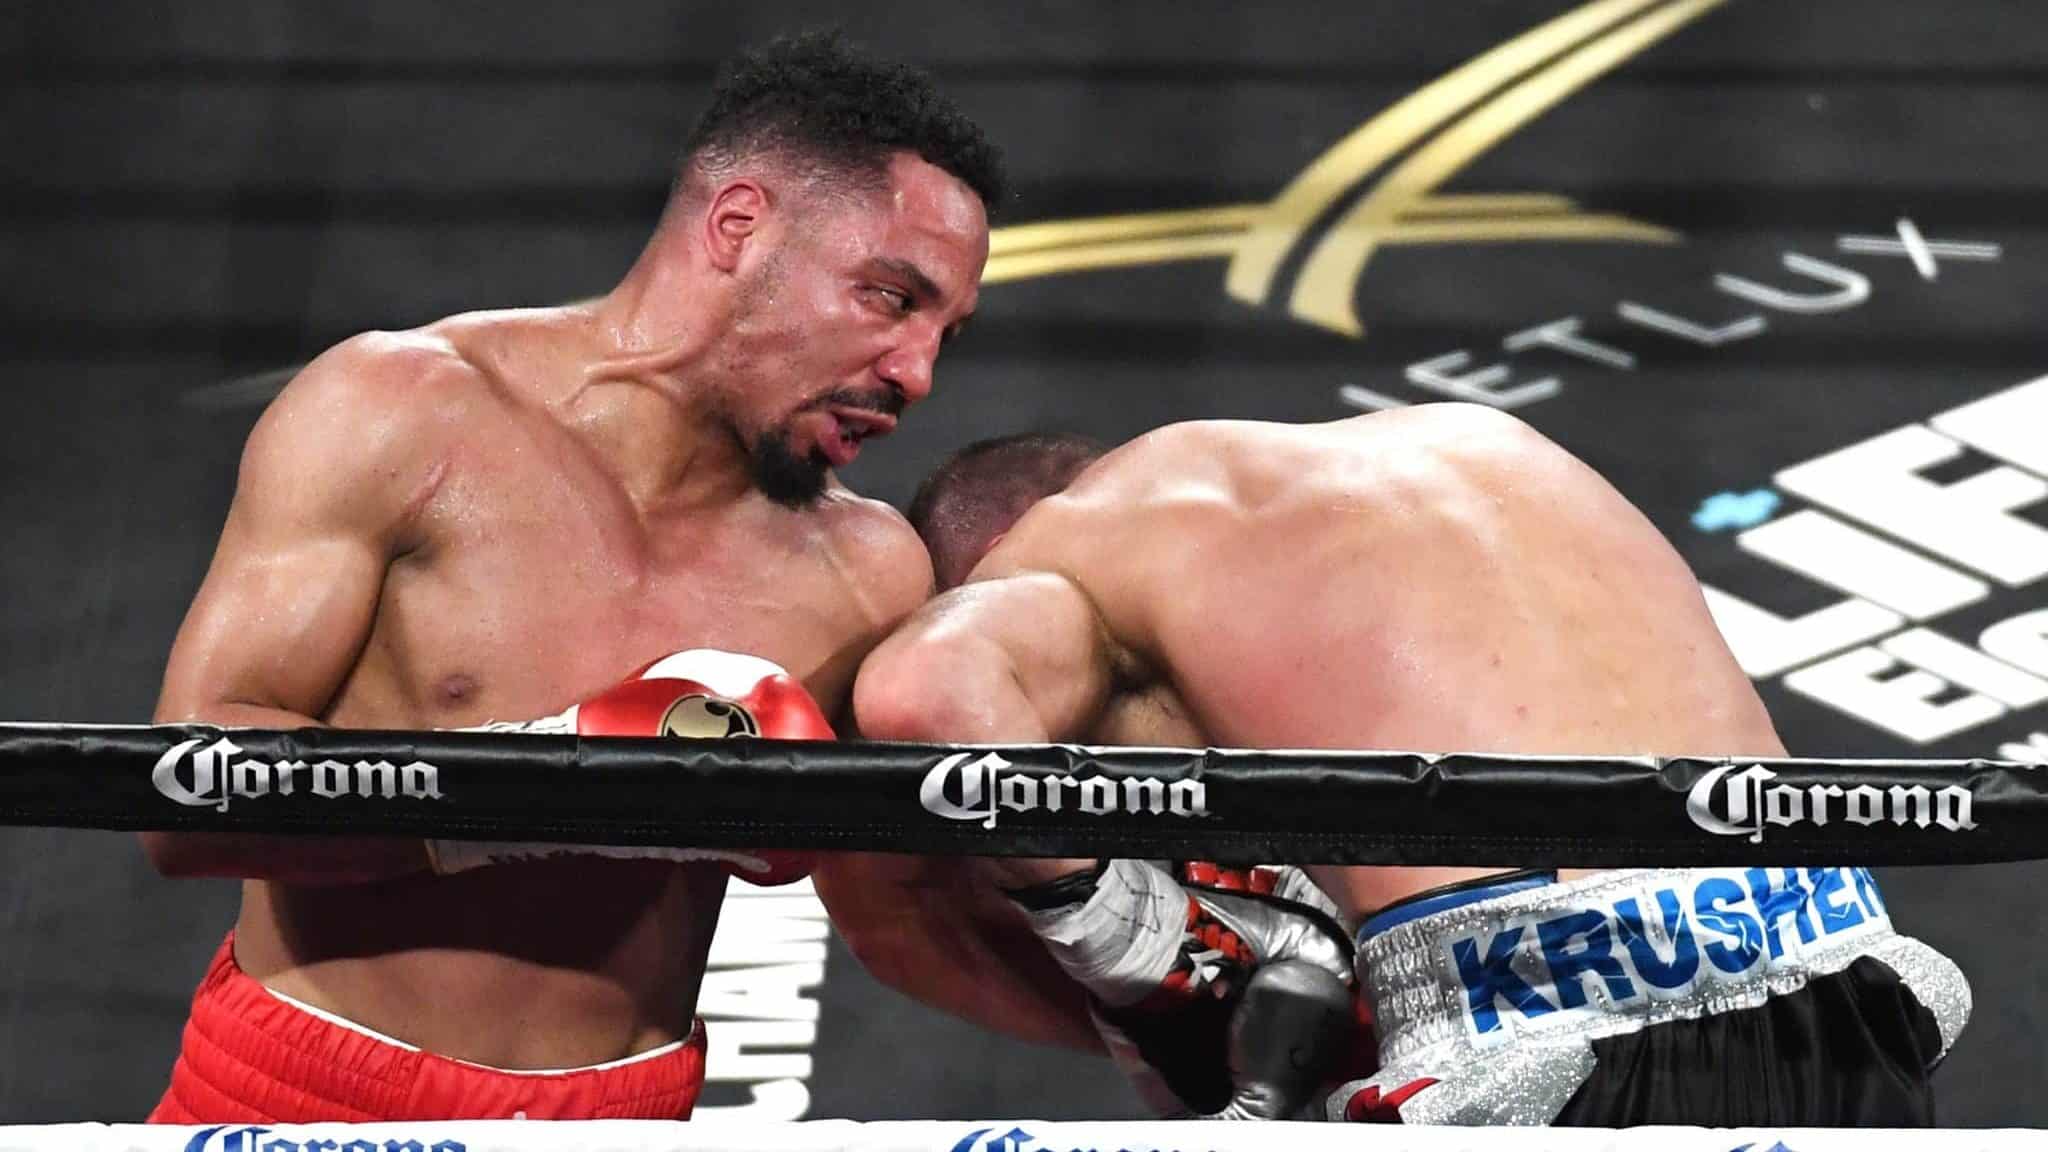 LAS VEGAS, NV - JUNE 17: Andre Ward (L) hits Sergey Kovalev with a left in the eighth round of their light heavyweight championship bout at the Mandalay Bay Events Center on June 17, 2017 in Las Vegas, Nevada. Ward retained his WBA/IBF/WBO titles with a TKO in the eighth round.